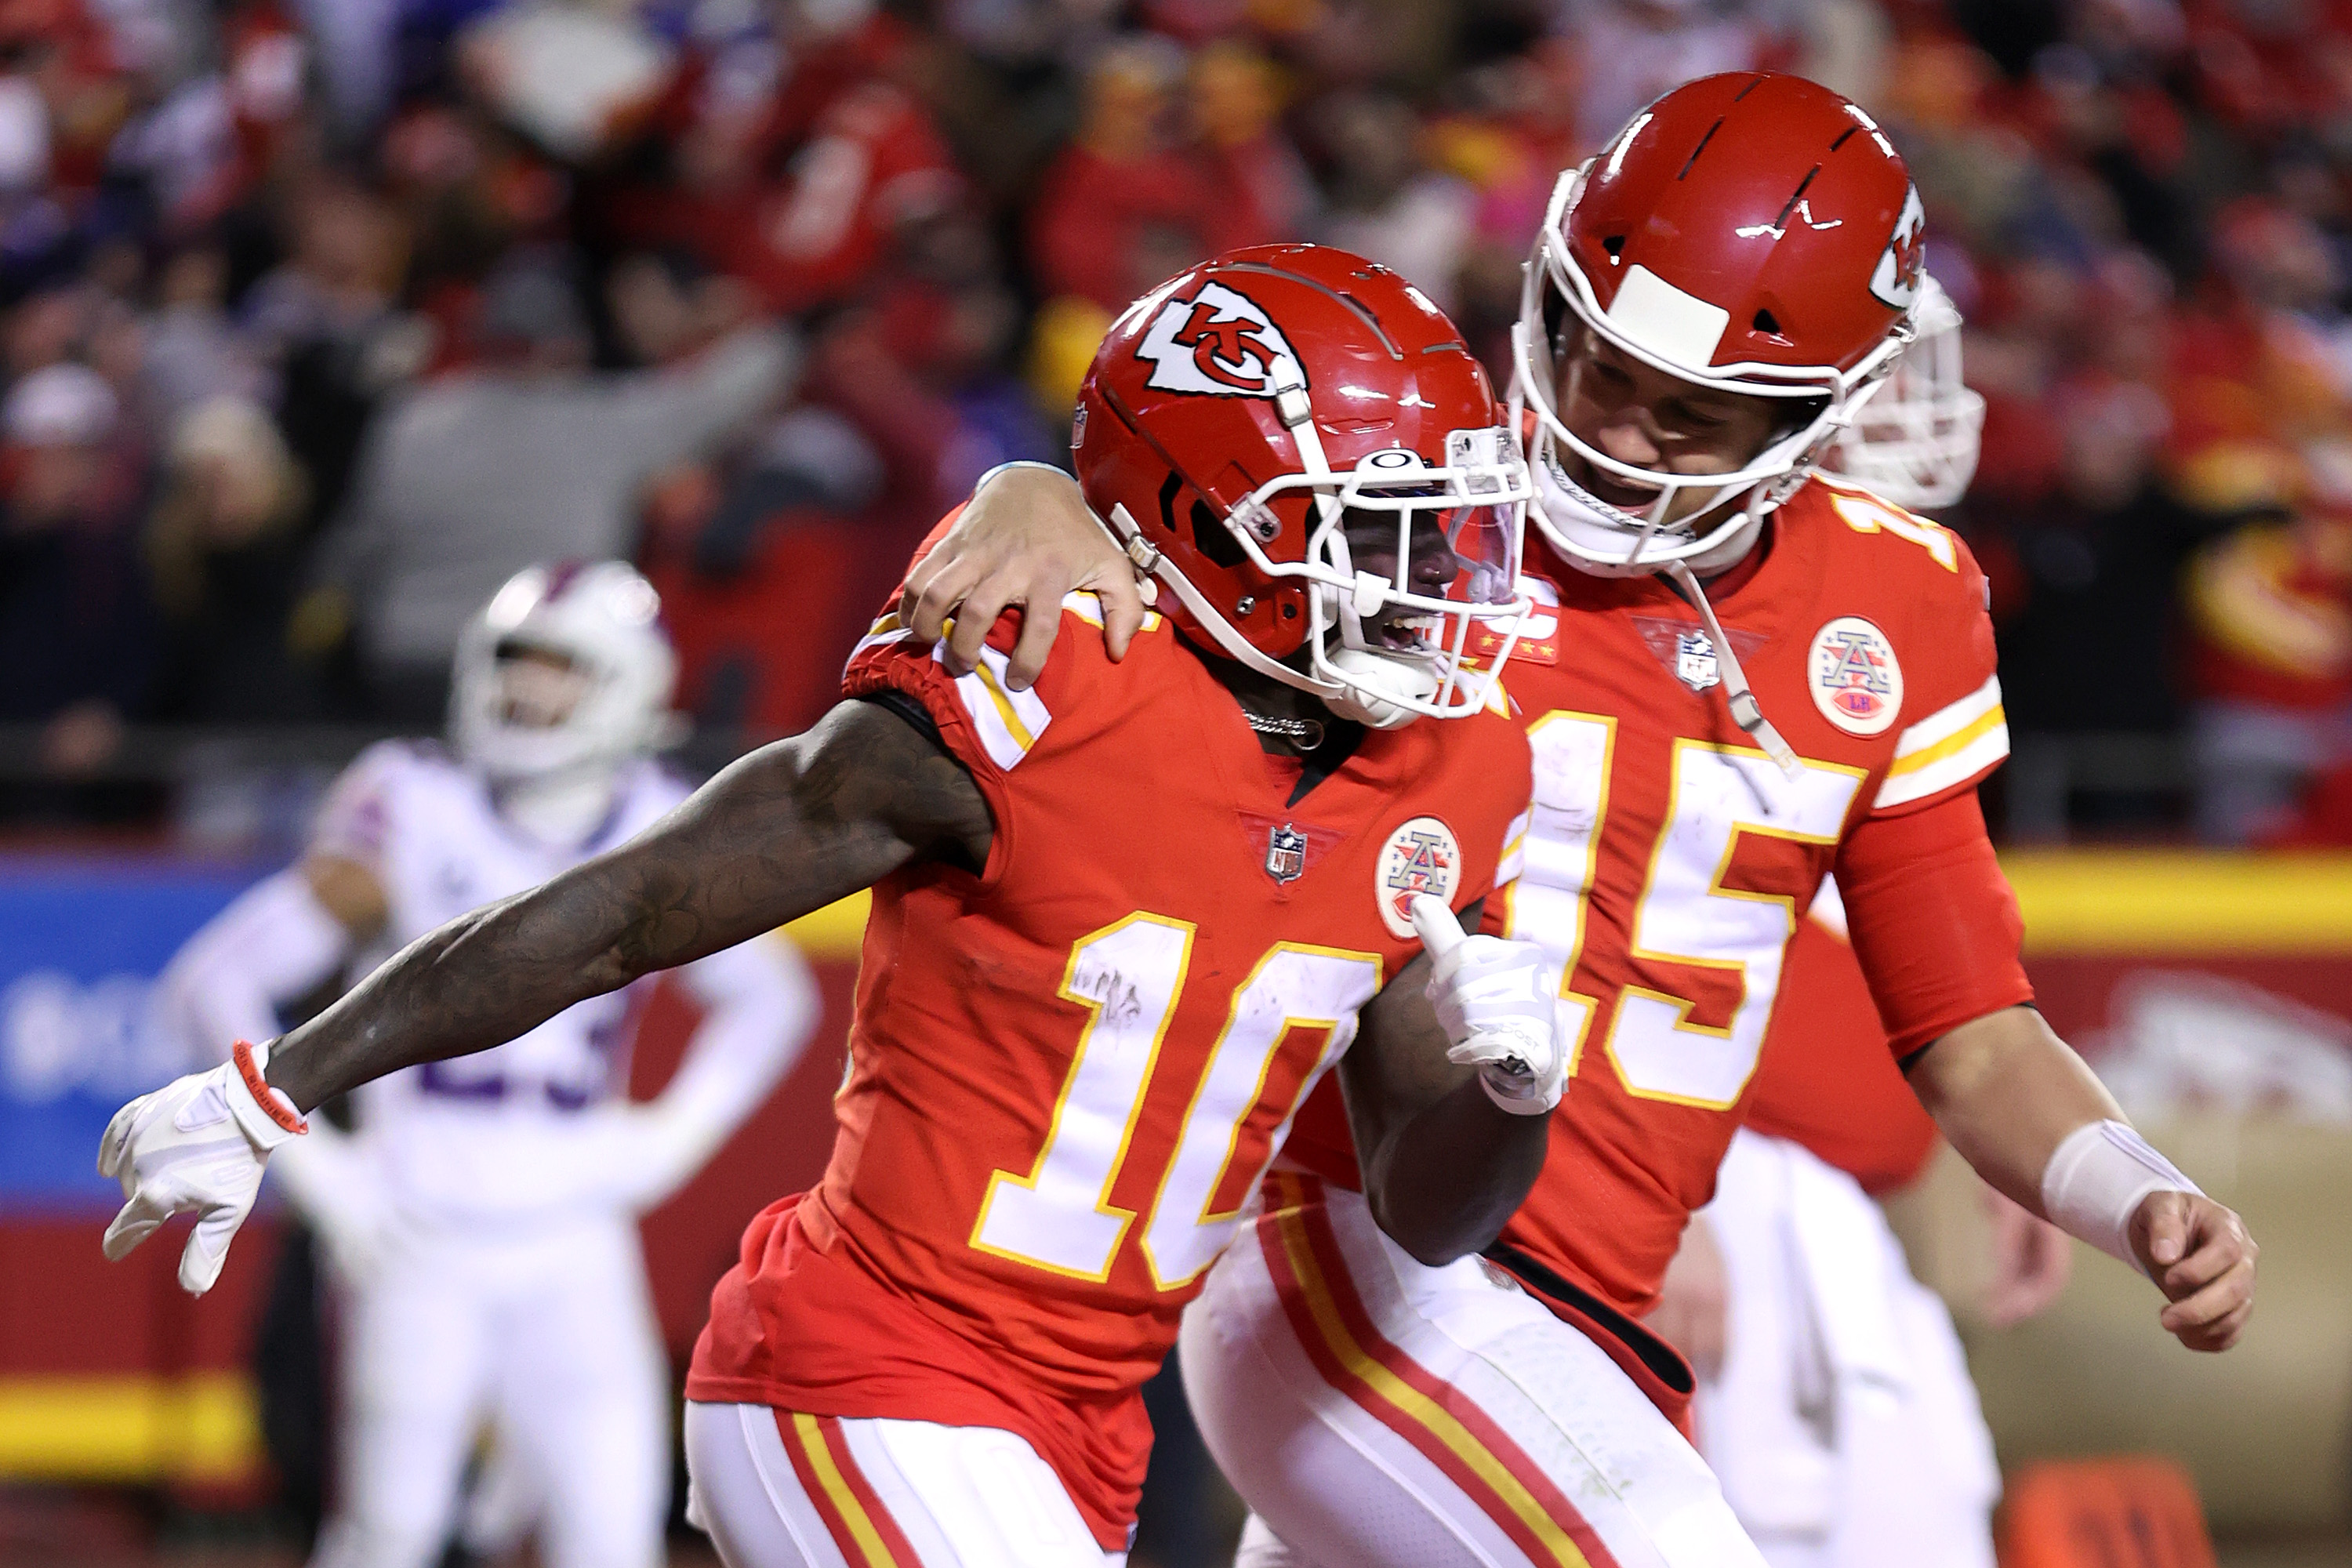 Tyreek Hill #10 of the Kansas City Chiefs celebrates with teammate Patrick Mahomes #15 after scoring a 64 yard touchdown against the Buffalo Bills during the fourth quarter in the AFC Divisional Playoff game at Arrowhead Stadium on January 23, 2022 in Kansas City, Missouri.